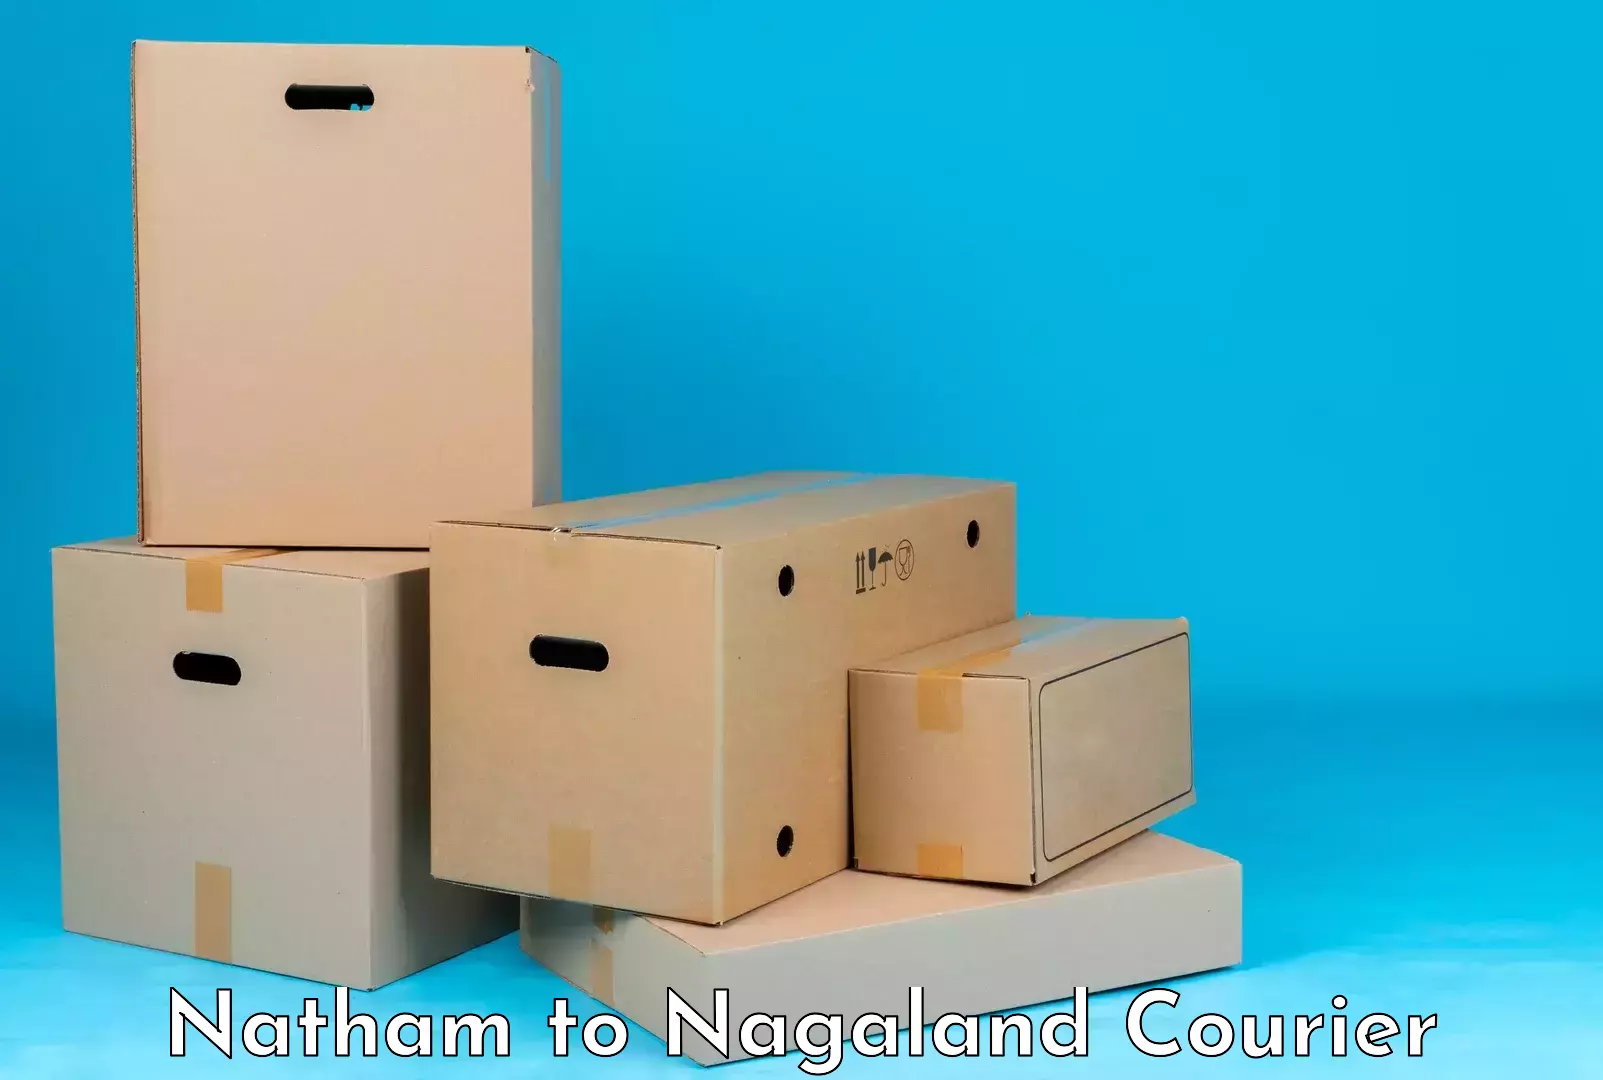 Luggage shipment specialists Natham to Mon